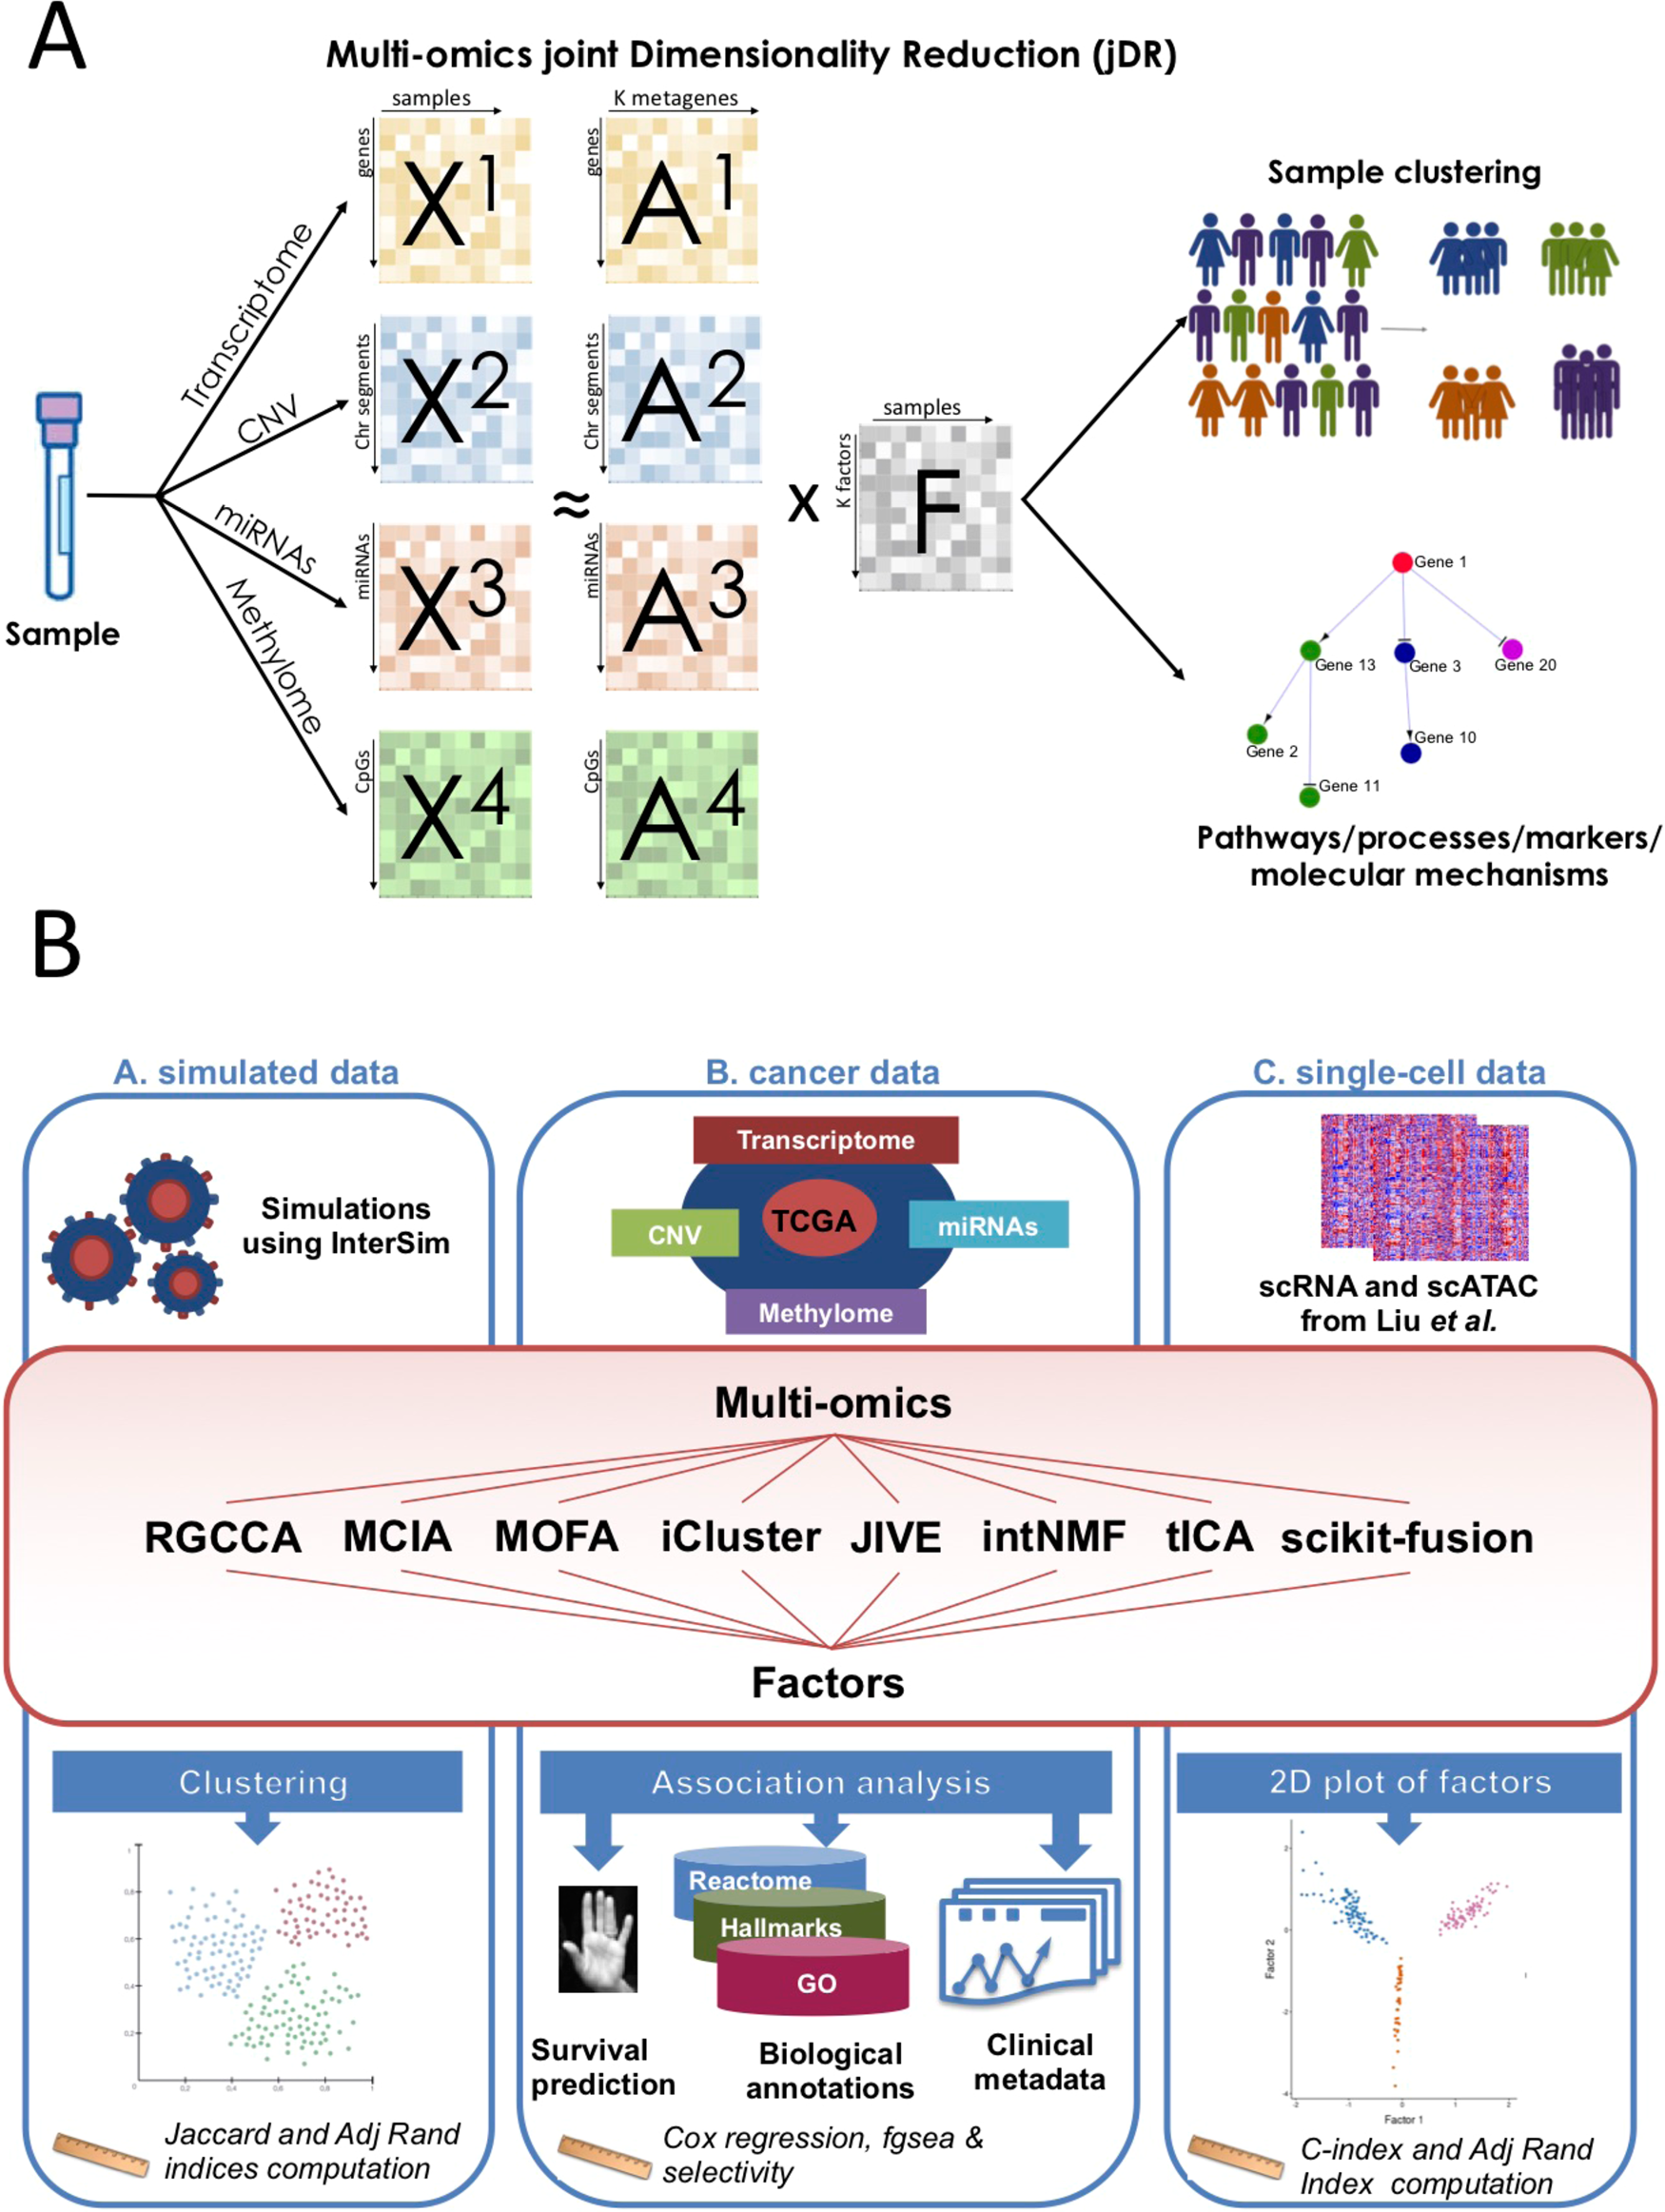 Benchmarking joint multi-omics dimensionality reduction approaches for the  study of cancer | Nature Communications